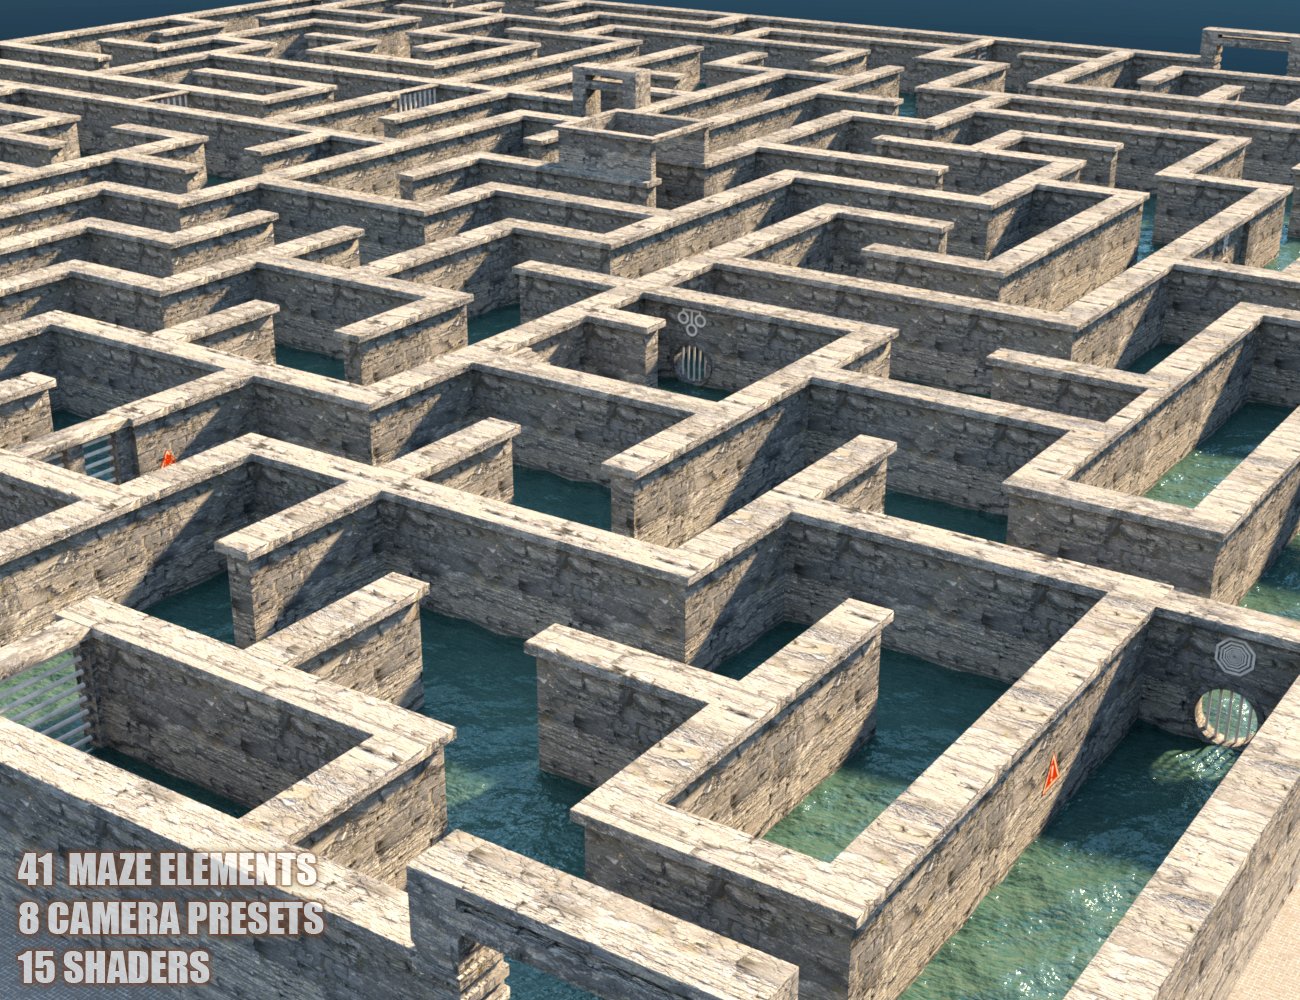 The Maze - Huge Labyrinth for Daz Studio by: Aedilium, 3D Models by Daz 3D